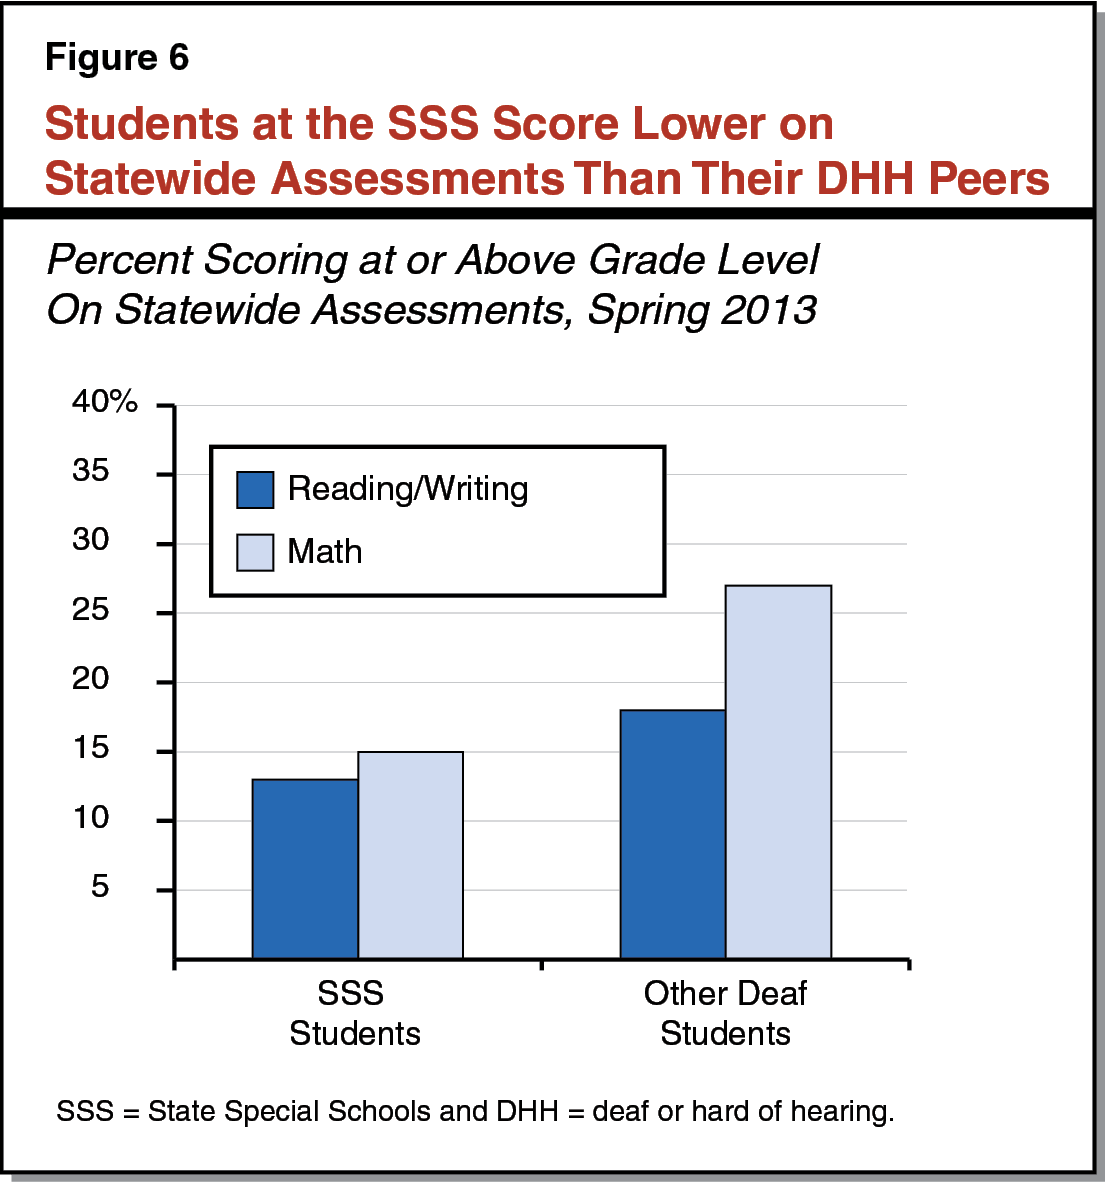 Figure 6 - Students at the SSS Score Lower on Statewide Assessments Than Their DHH Peers